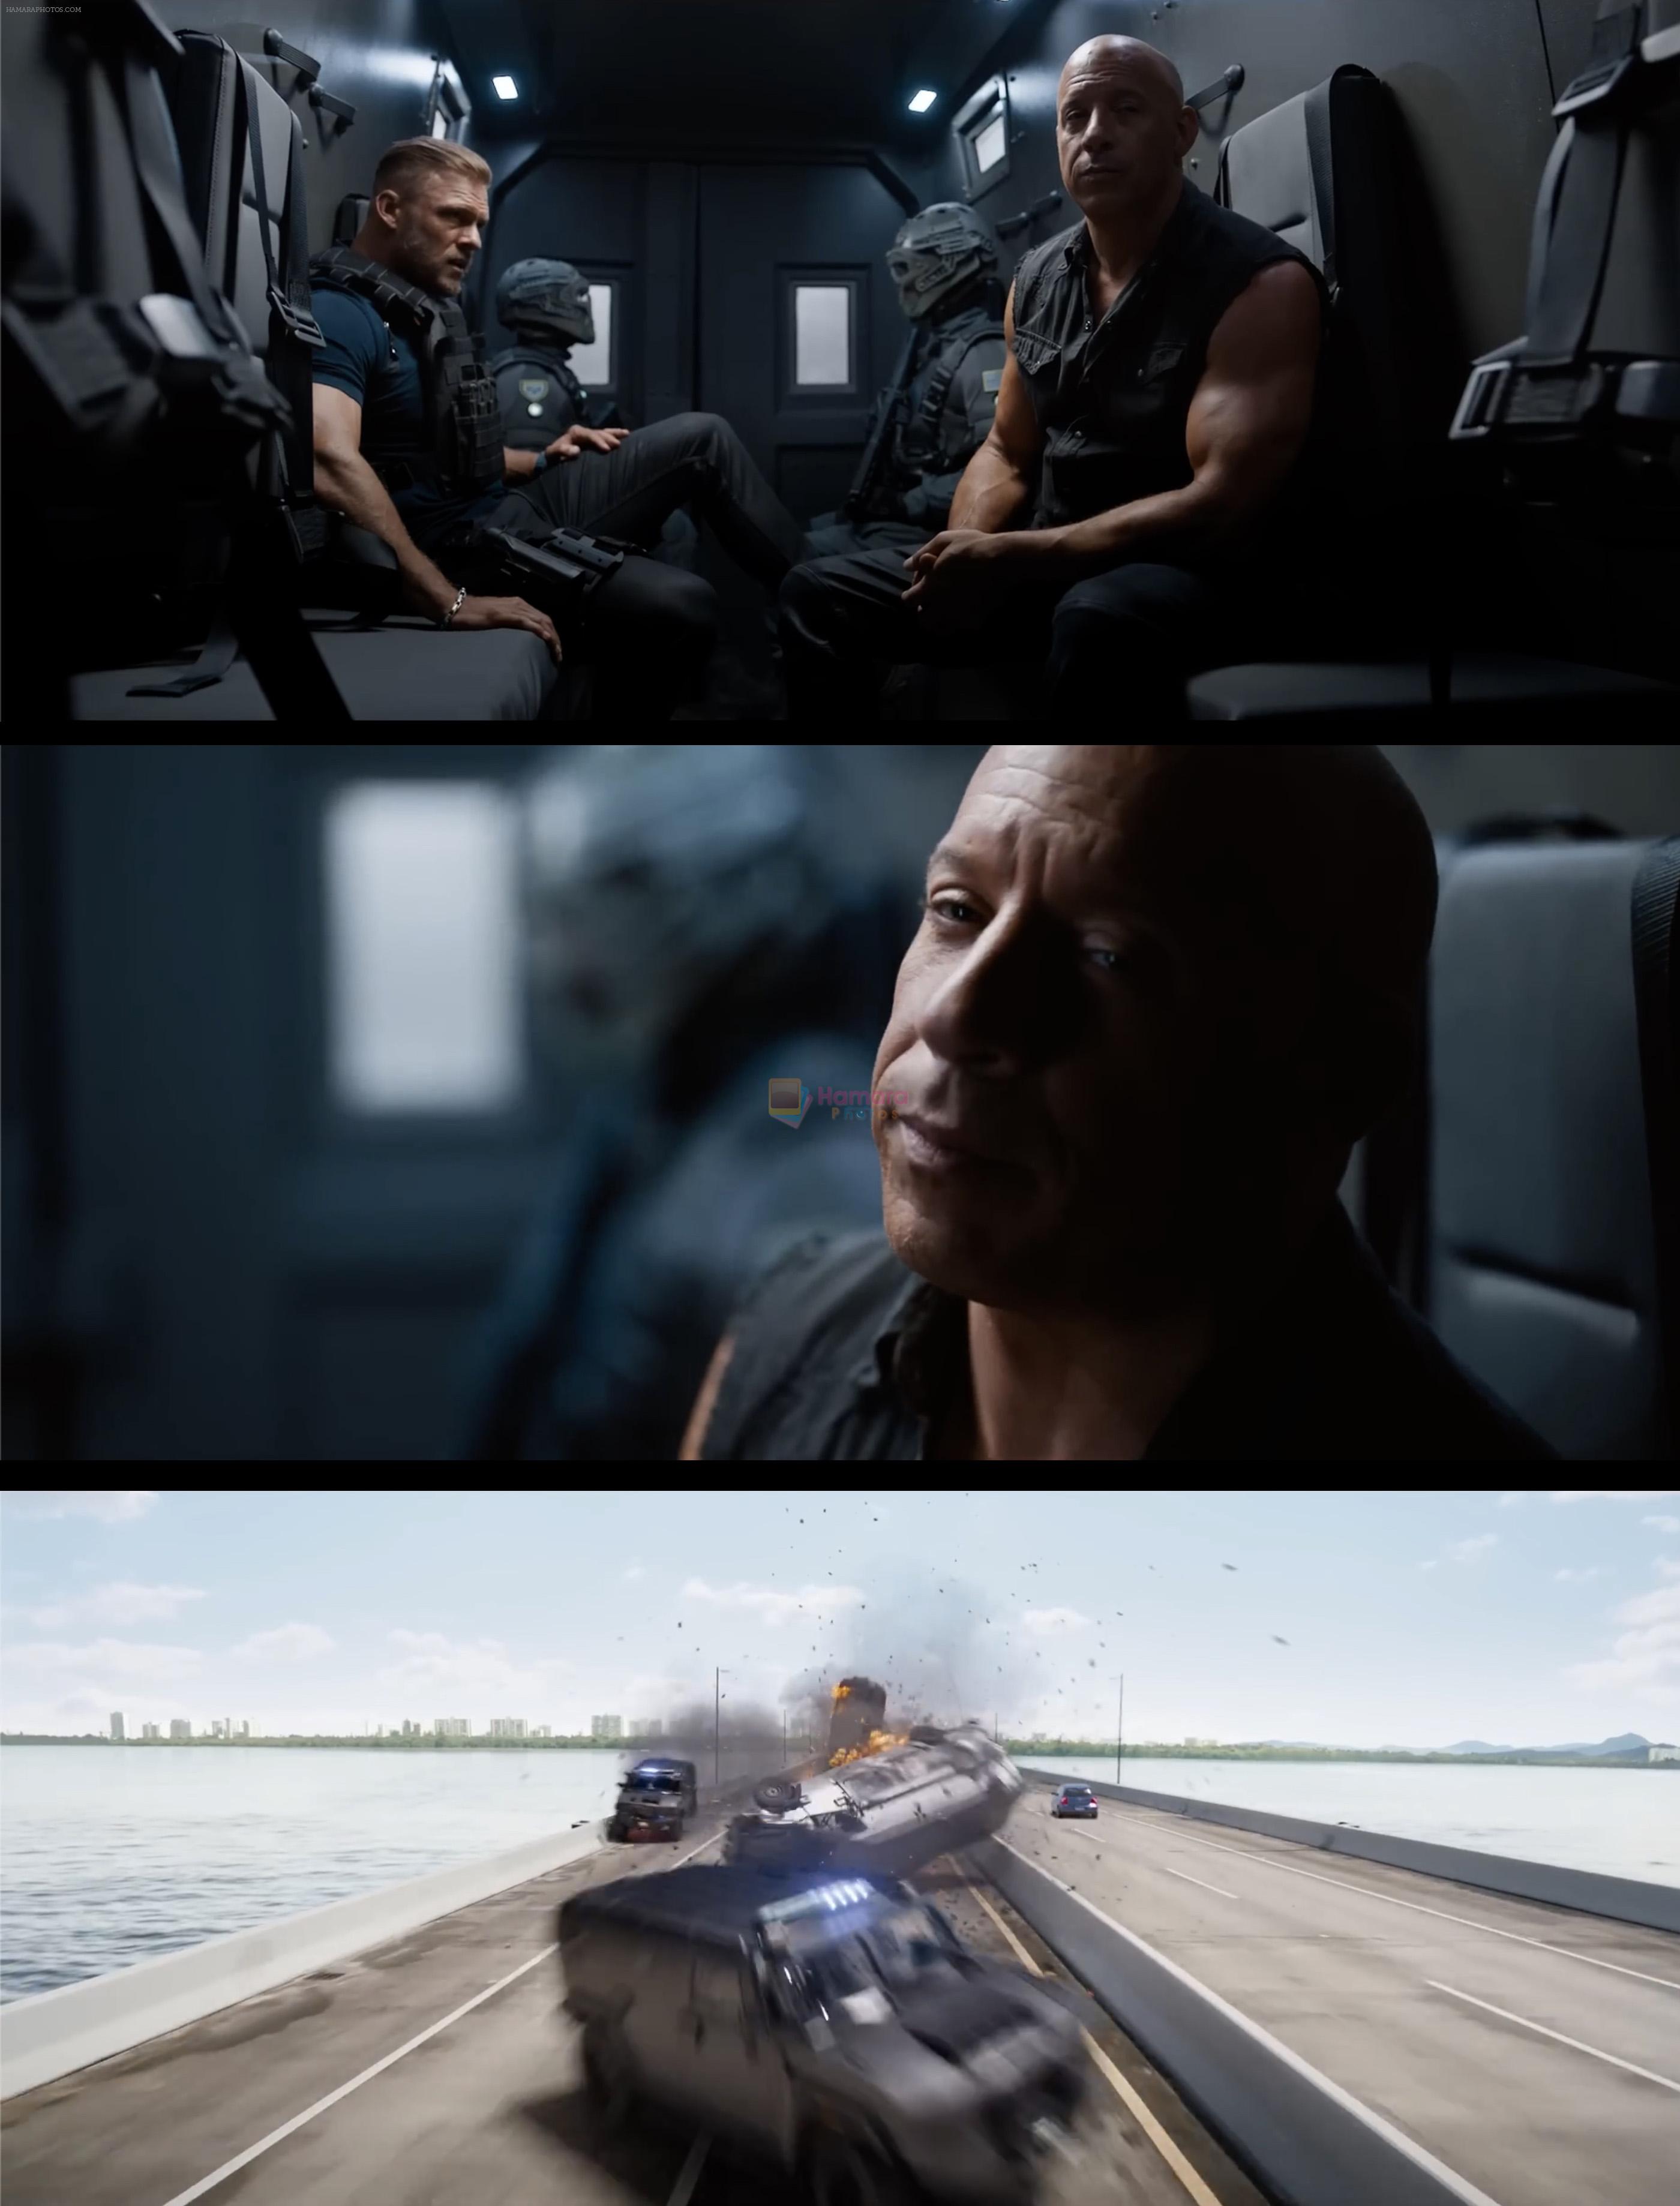 Vin Diesel as Dominic Toretto and John Cena as Jakob in Still from movie Fast X